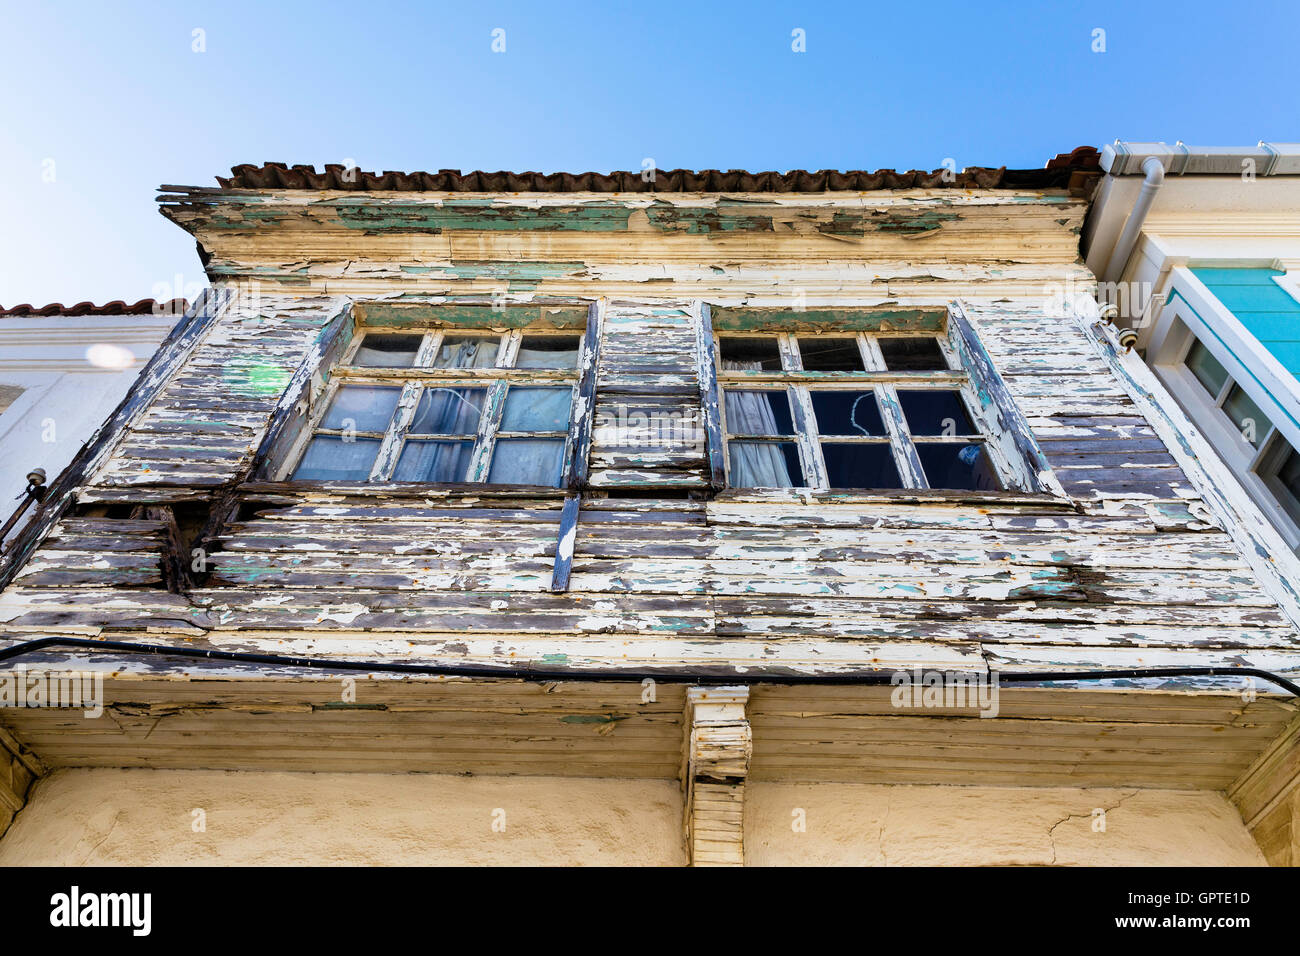 Historical old Ottoman wooden house closeup view in Bozcaada, Canakkale, Turkey Stock Photo